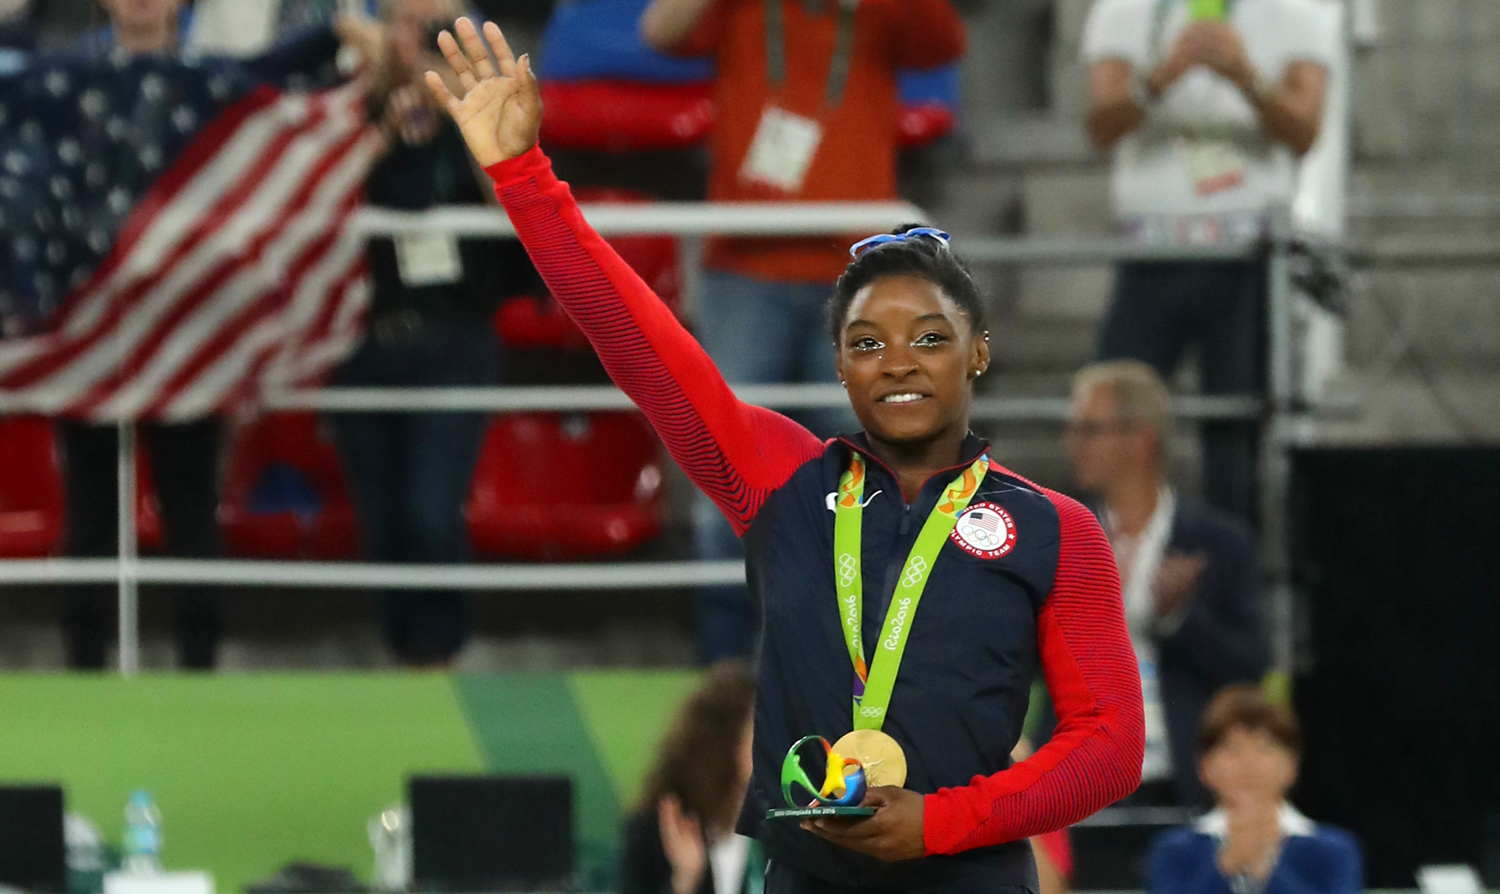 Simone Biles smiles and waves while wearing a USA track jacket with a gold medal around her neck.